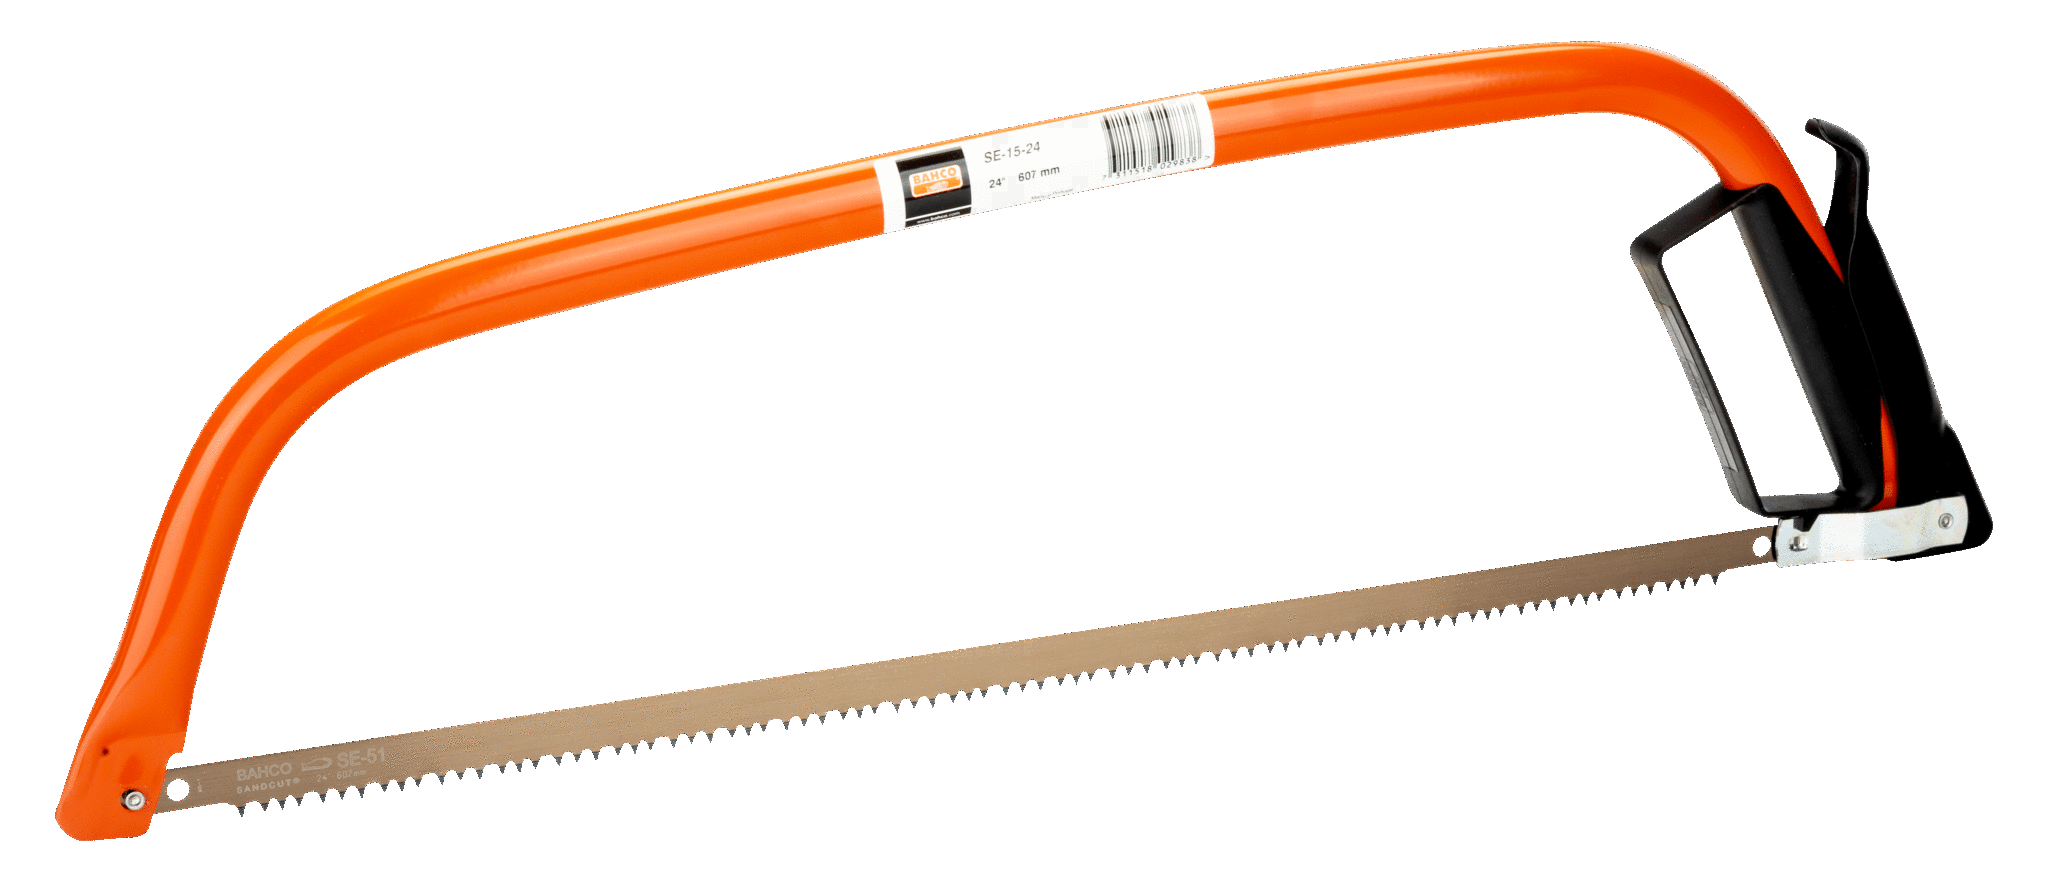 General Purpose Bow Saws 24" - SE-15-24 by Bahco